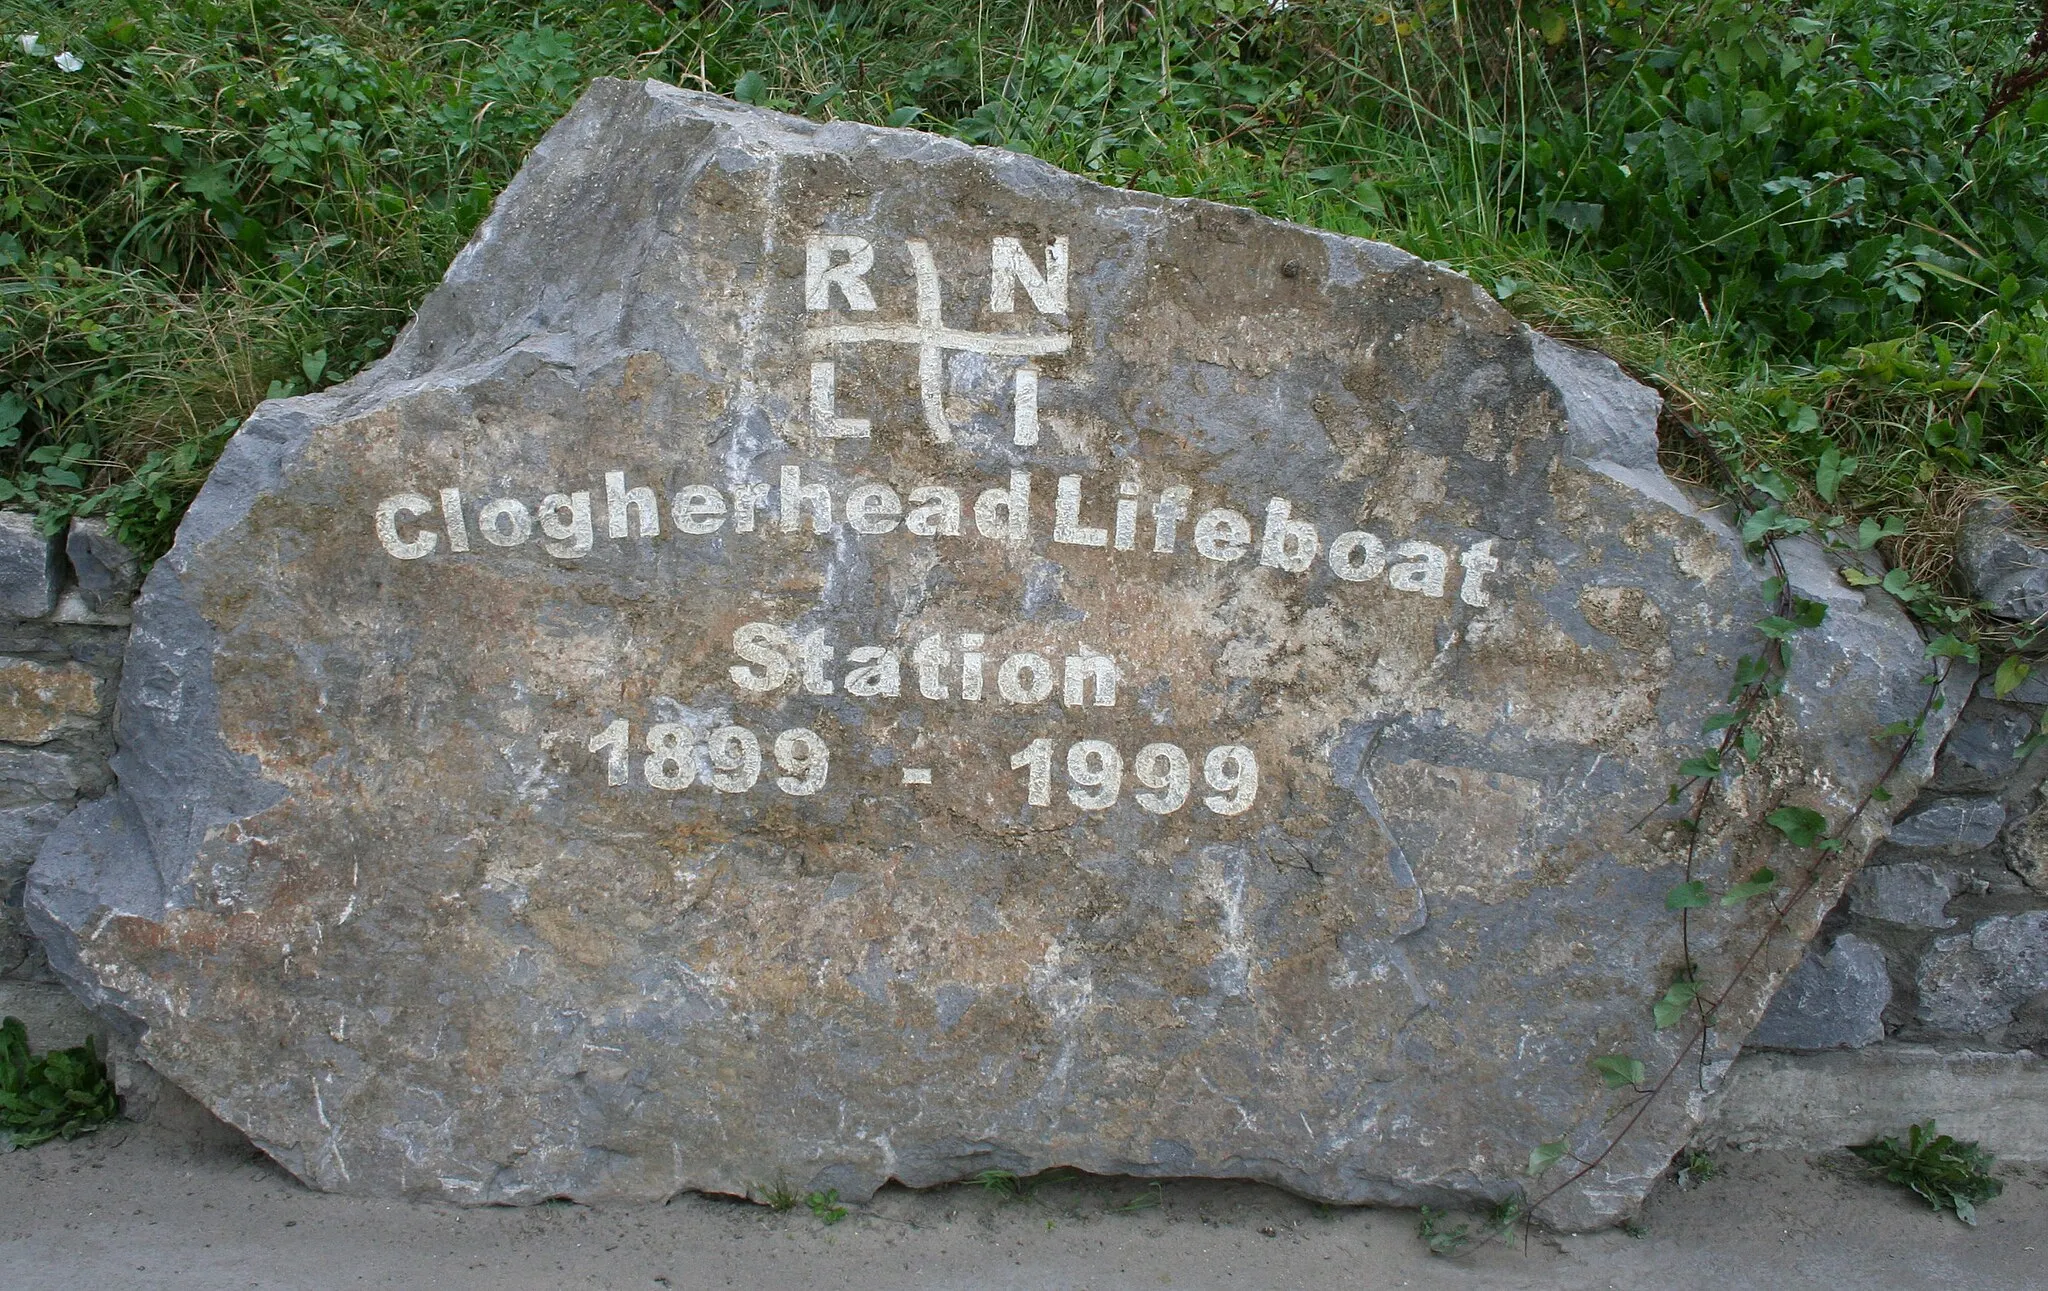 Photo showing: Celebrating 100 years of Clogher Head Lifeboat Station
Credit: A Peter Clarke image